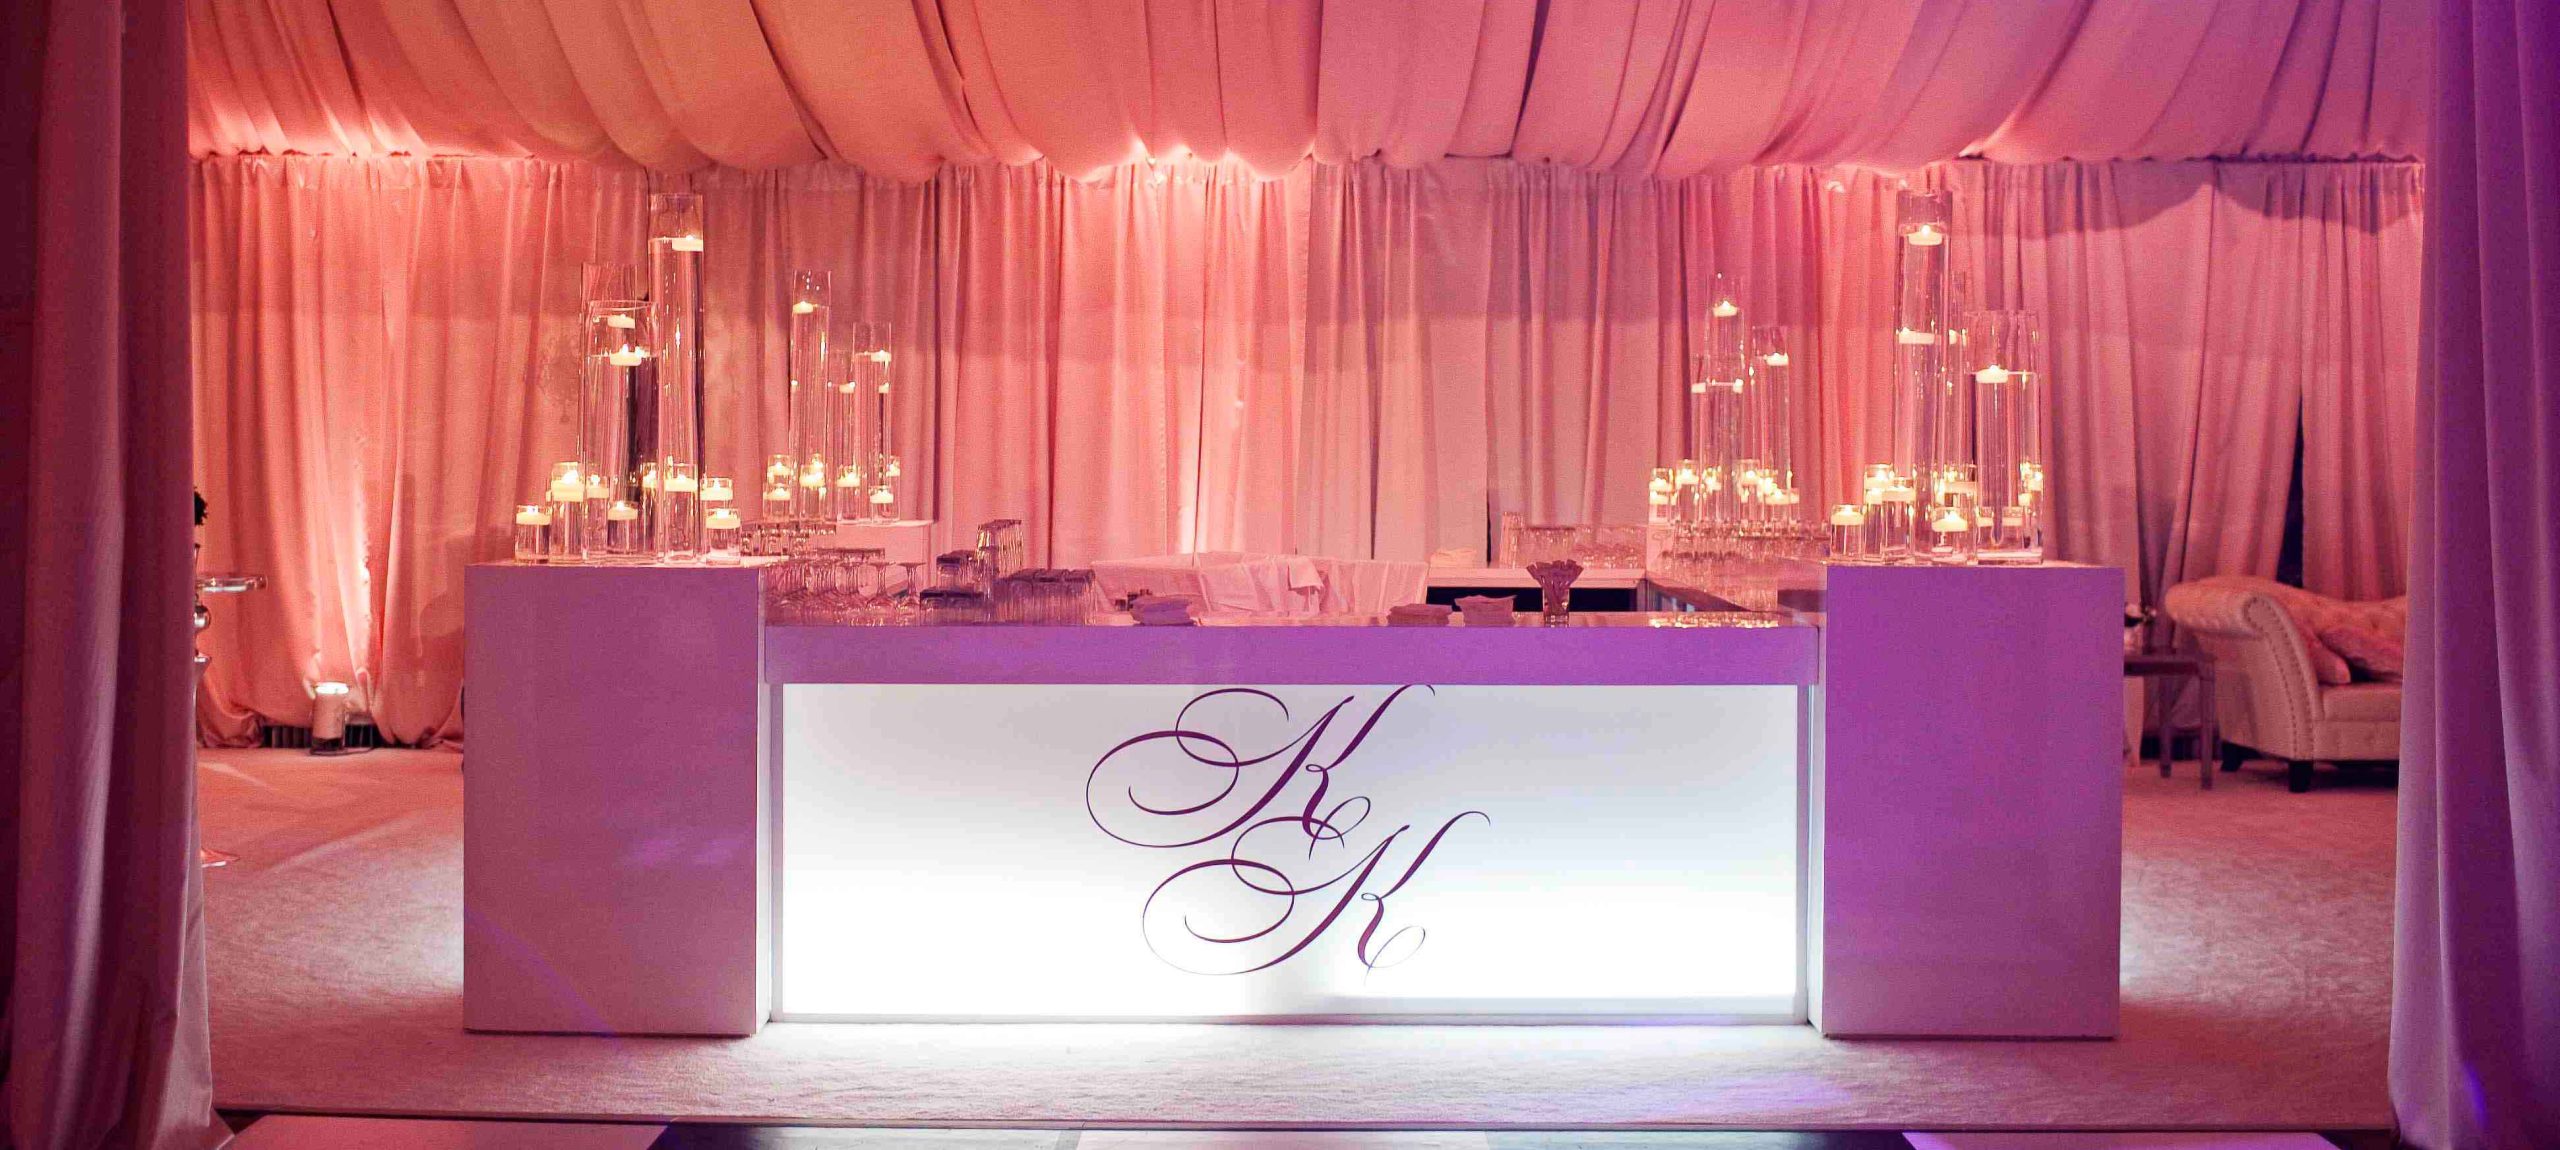 How to Decorate Wedding Bar